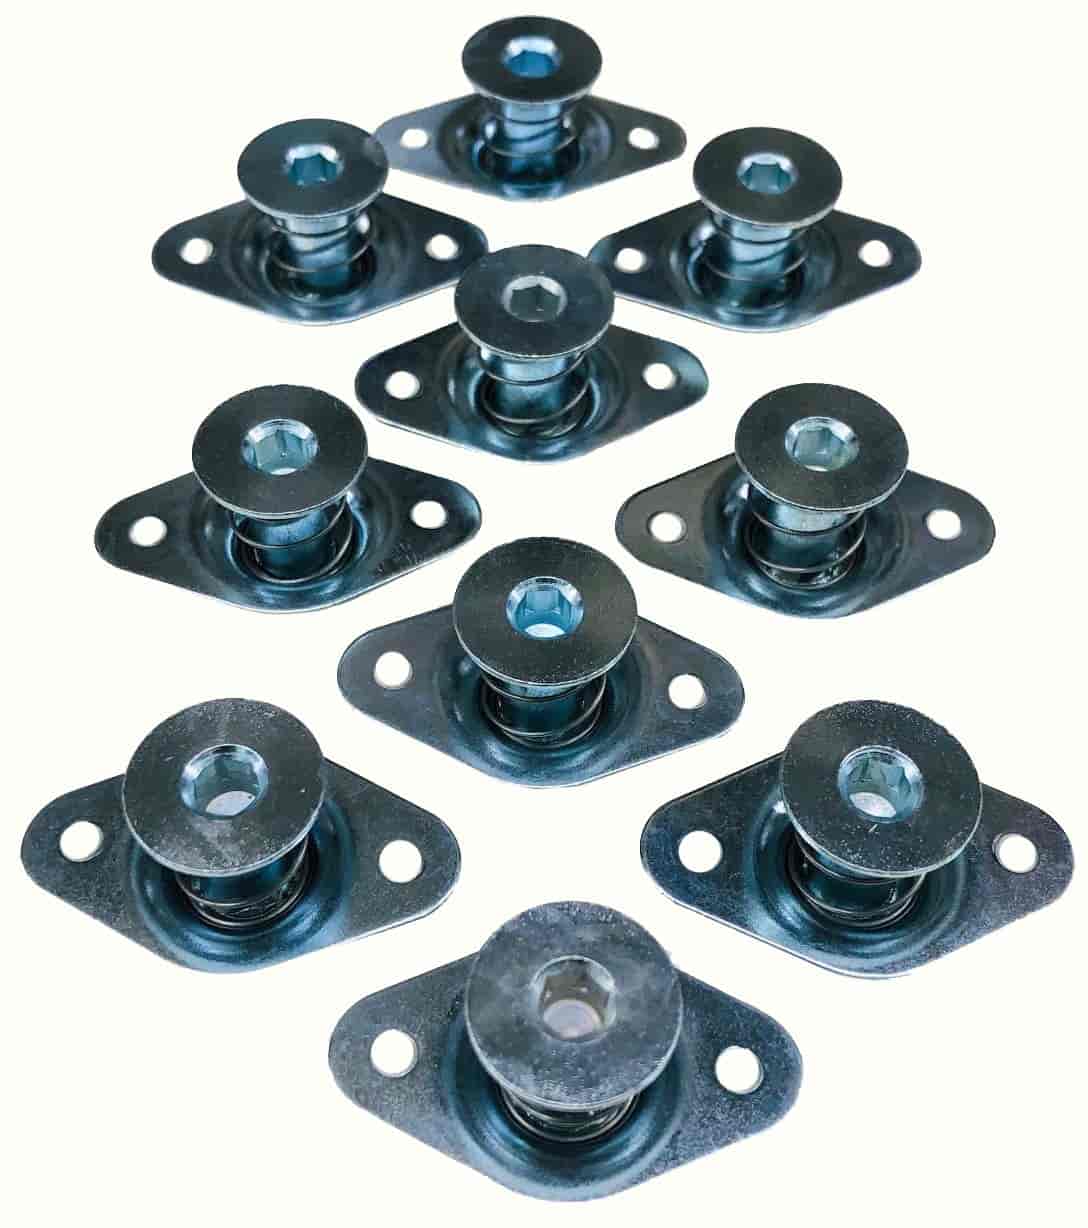 Self-Ejecting Quarter-Turn DZUS Button Fasteners Hex Head, 5/16